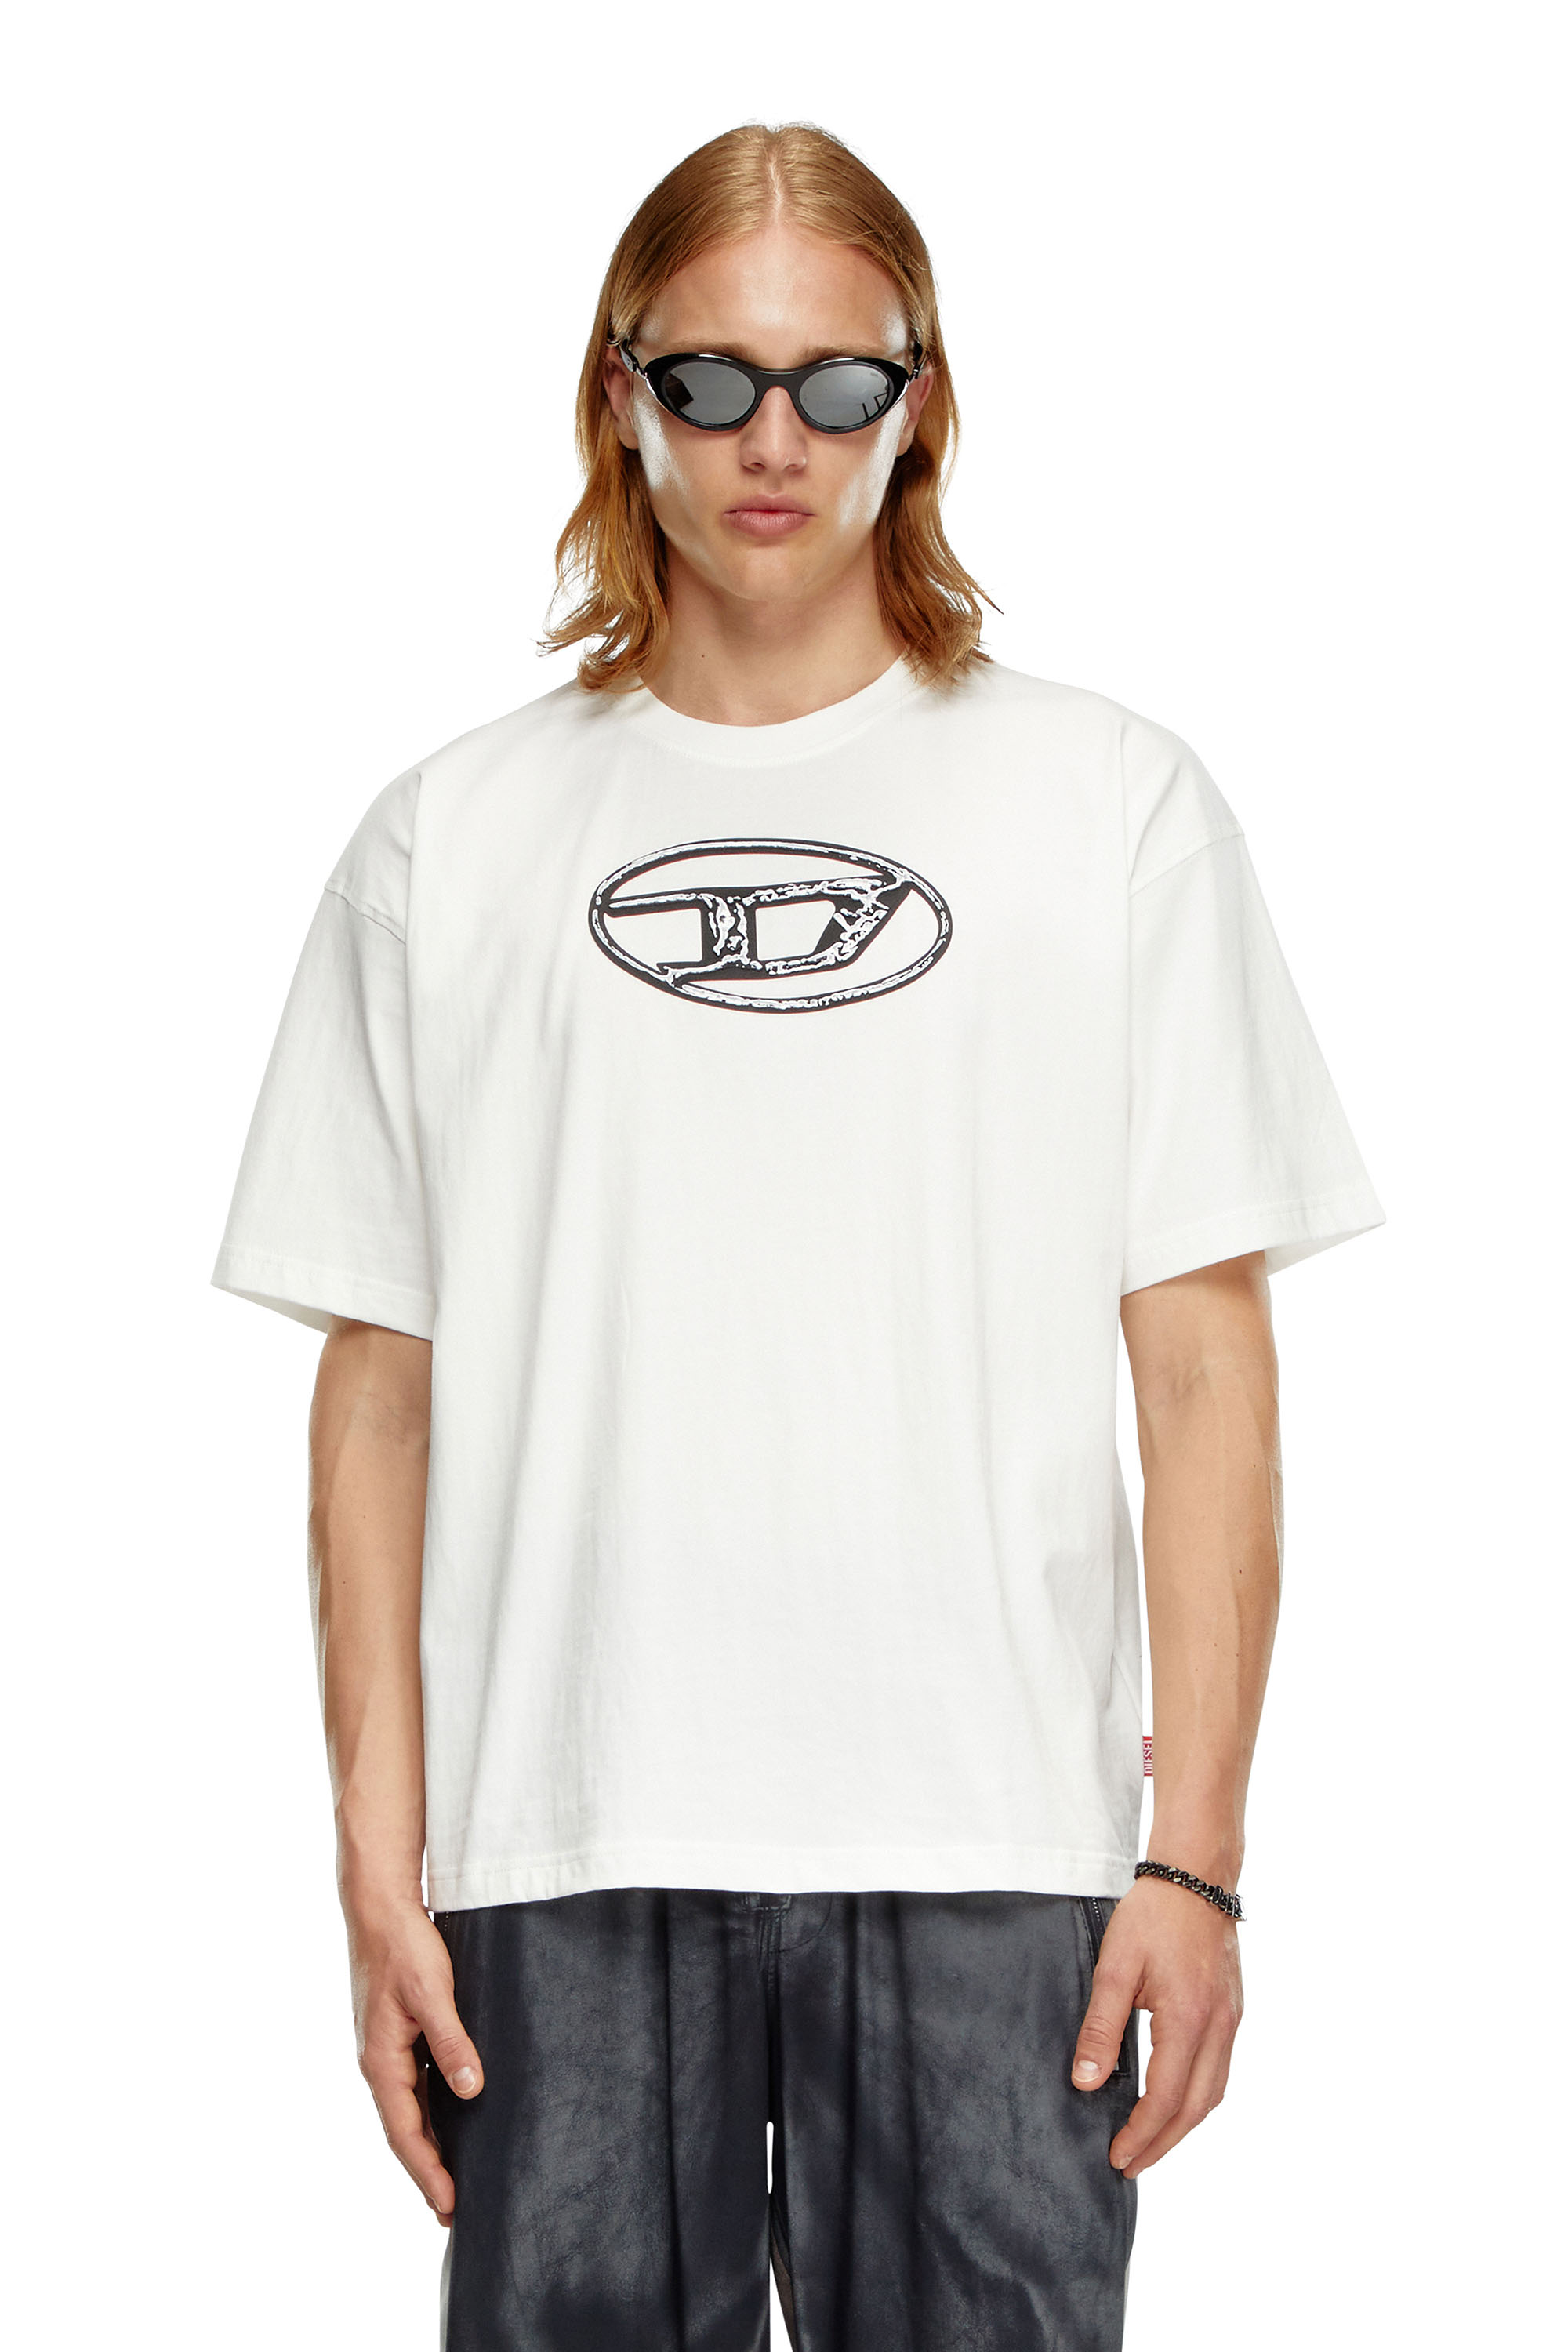 Diesel - T-BOXT-Q22, Man Faded T-shirt with Oval D print in White - Image 1